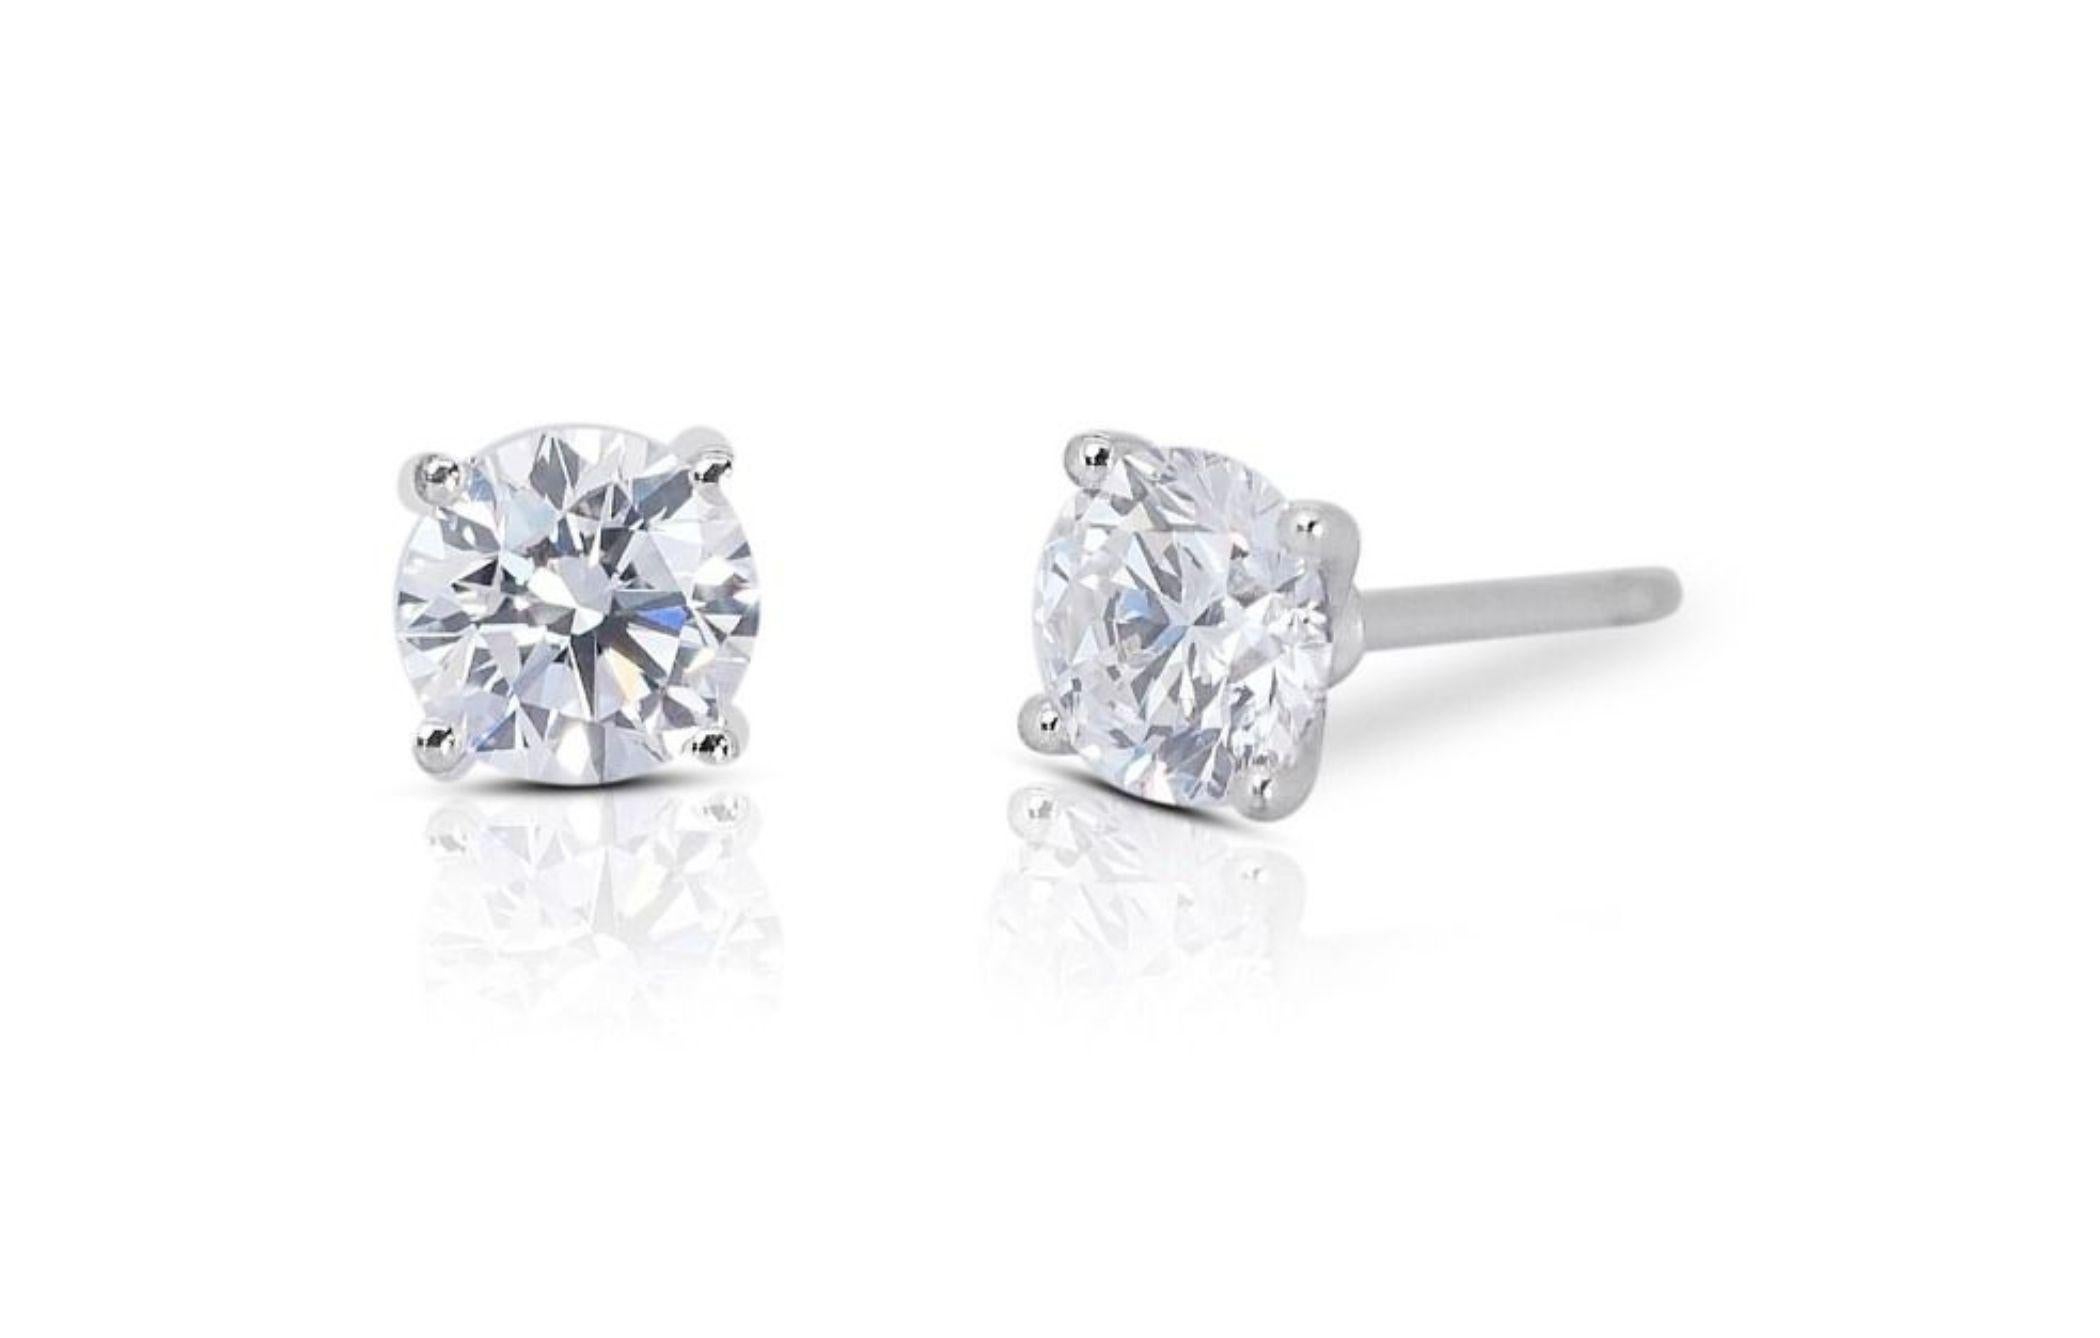 18K White Gold Earrings with 1.06ct Diamond 2